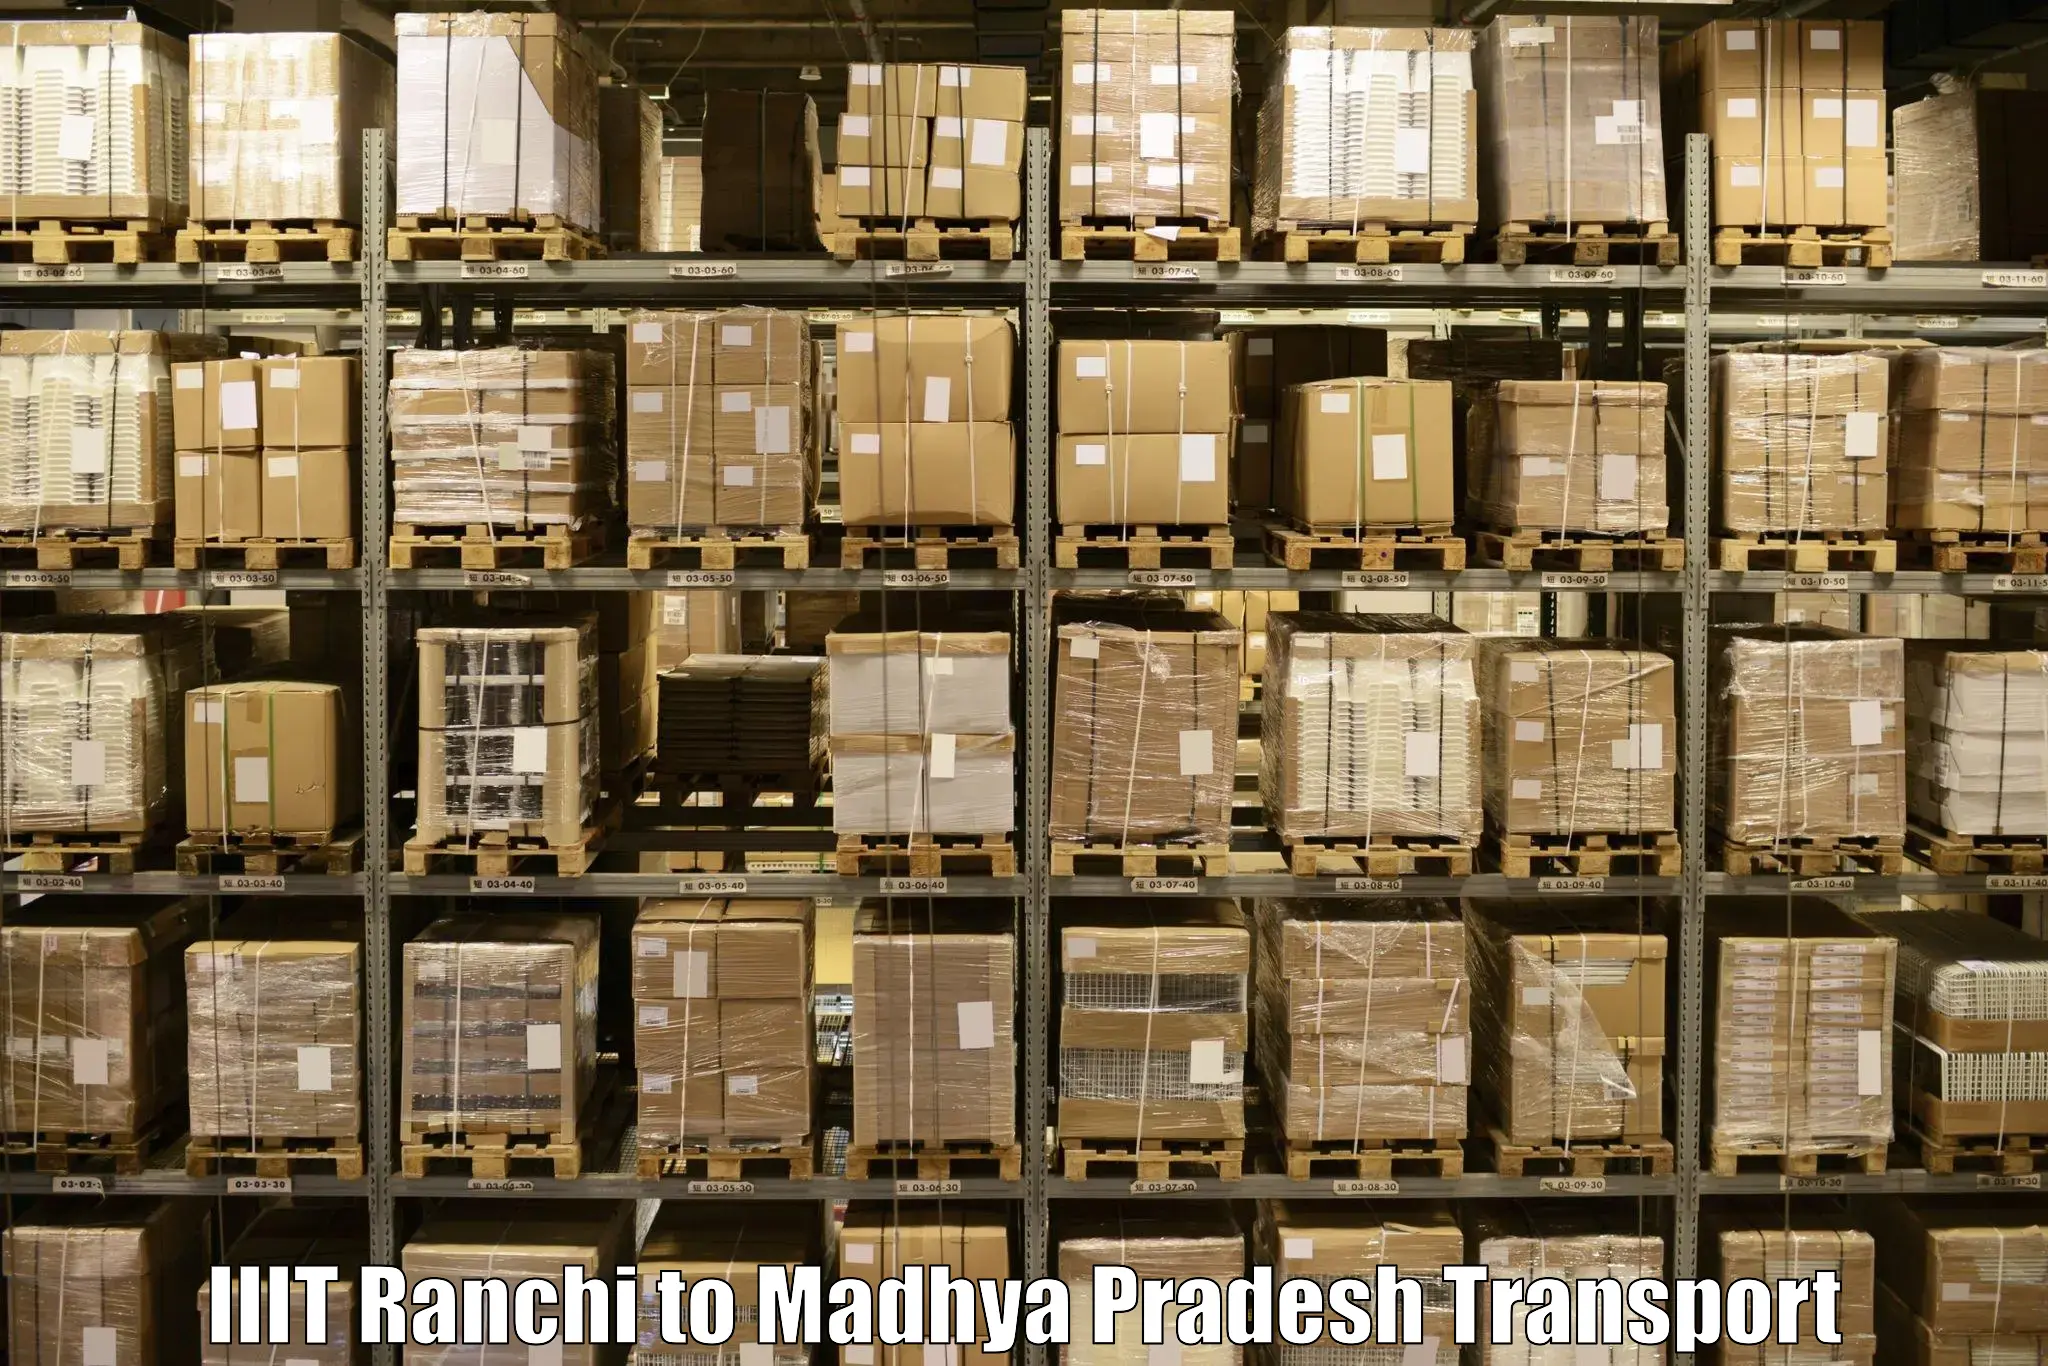 Express transport services IIIT Ranchi to Sidhi